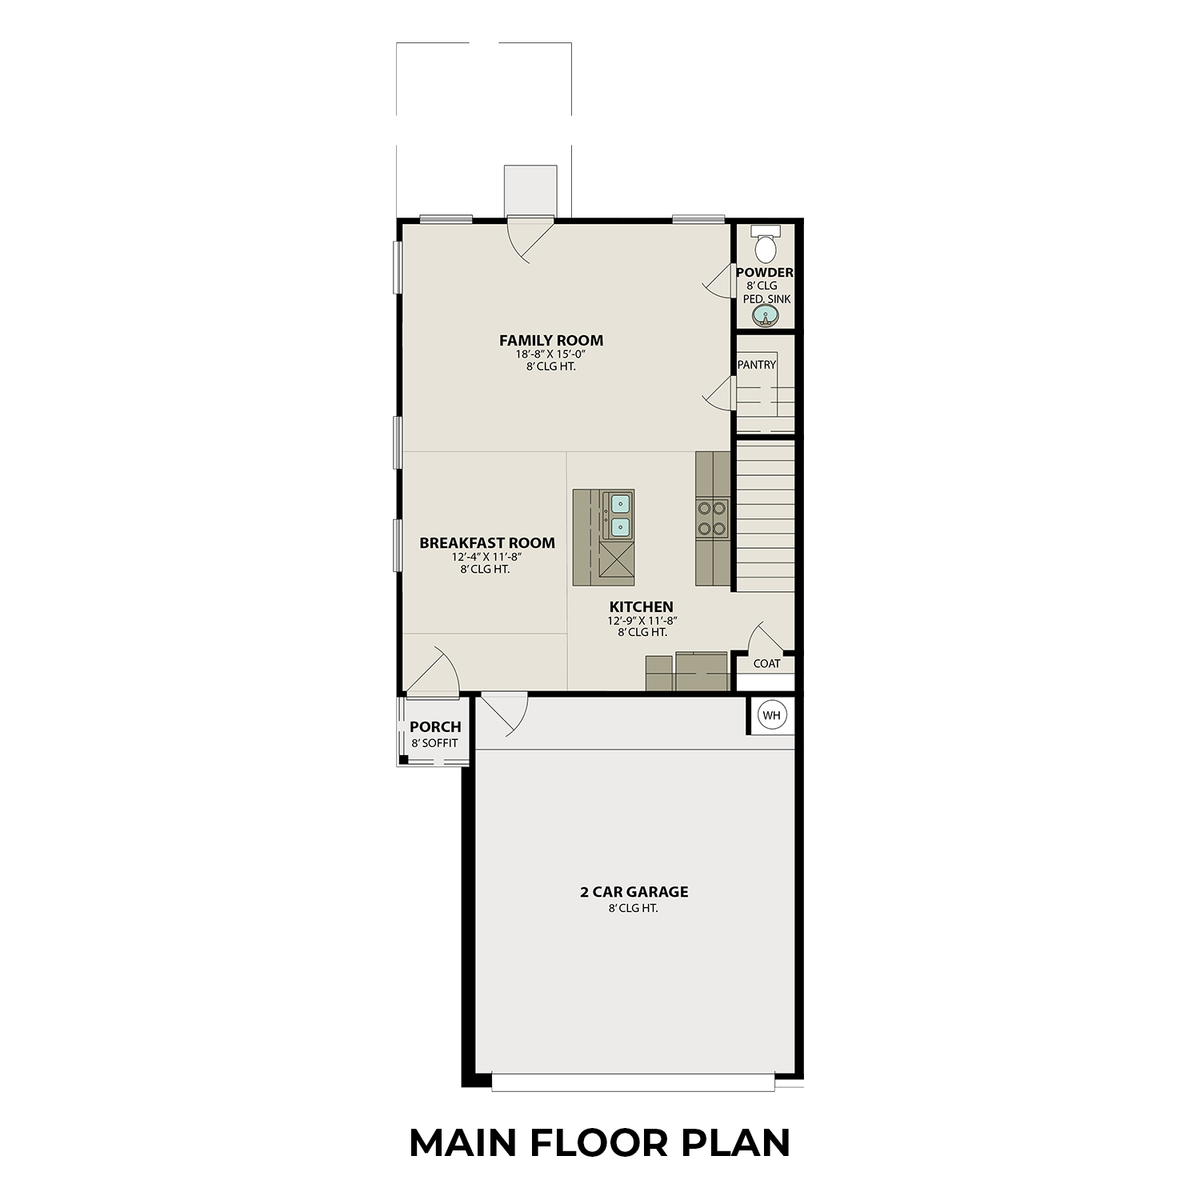 1 - The Lily B floor plan layout for 5263 Shallowhurst Lane in Davidson Homes' Haven at Kieth Harrow community.